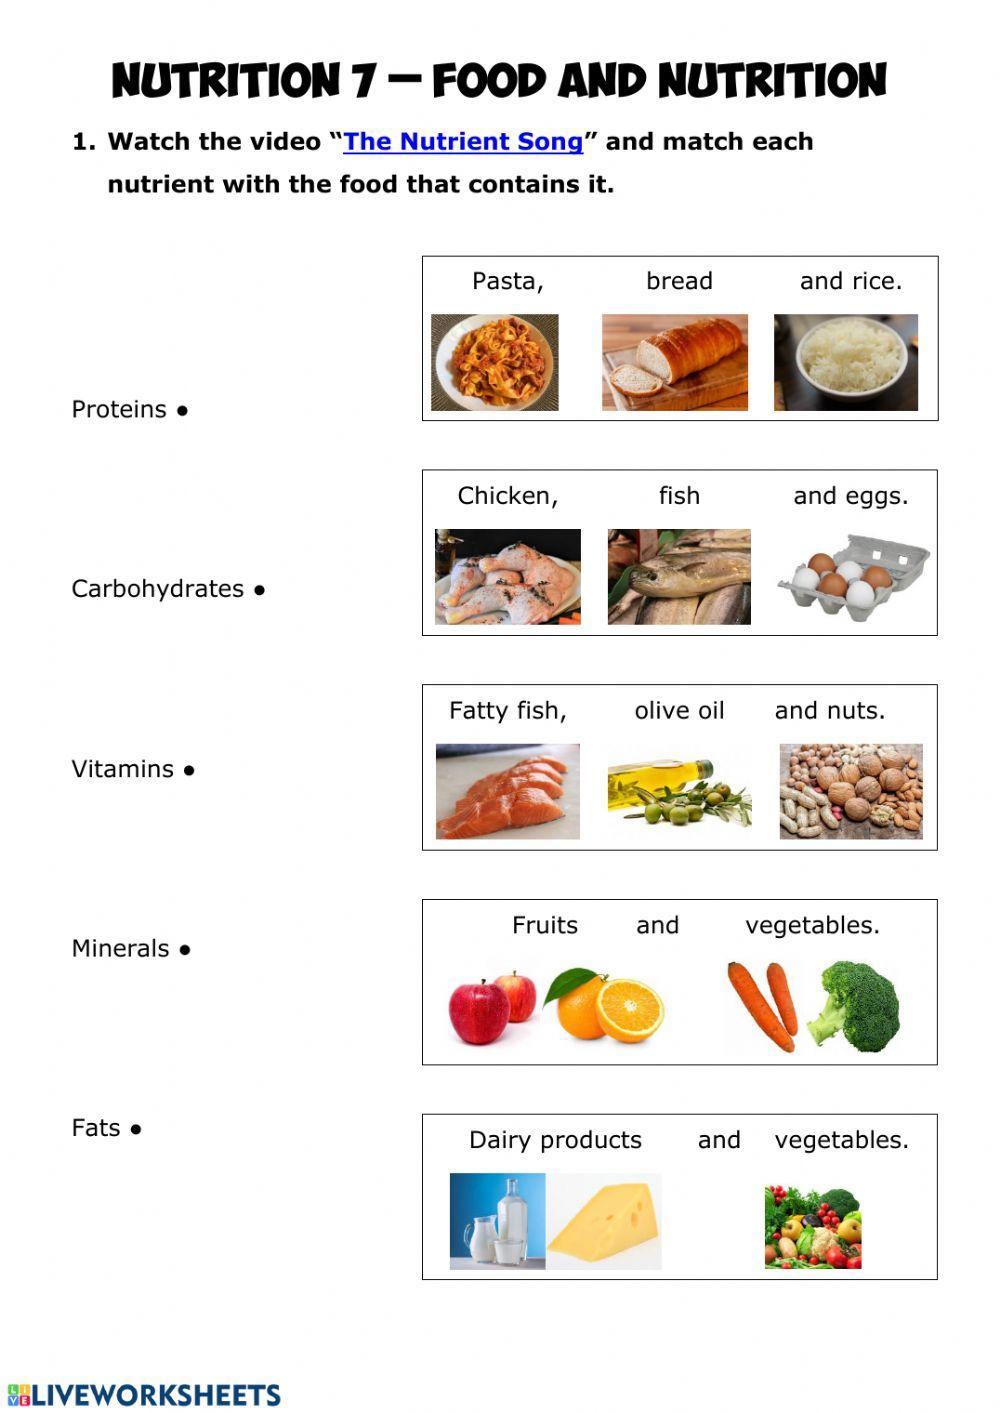 NUTRITION 7 - Food and nutrition